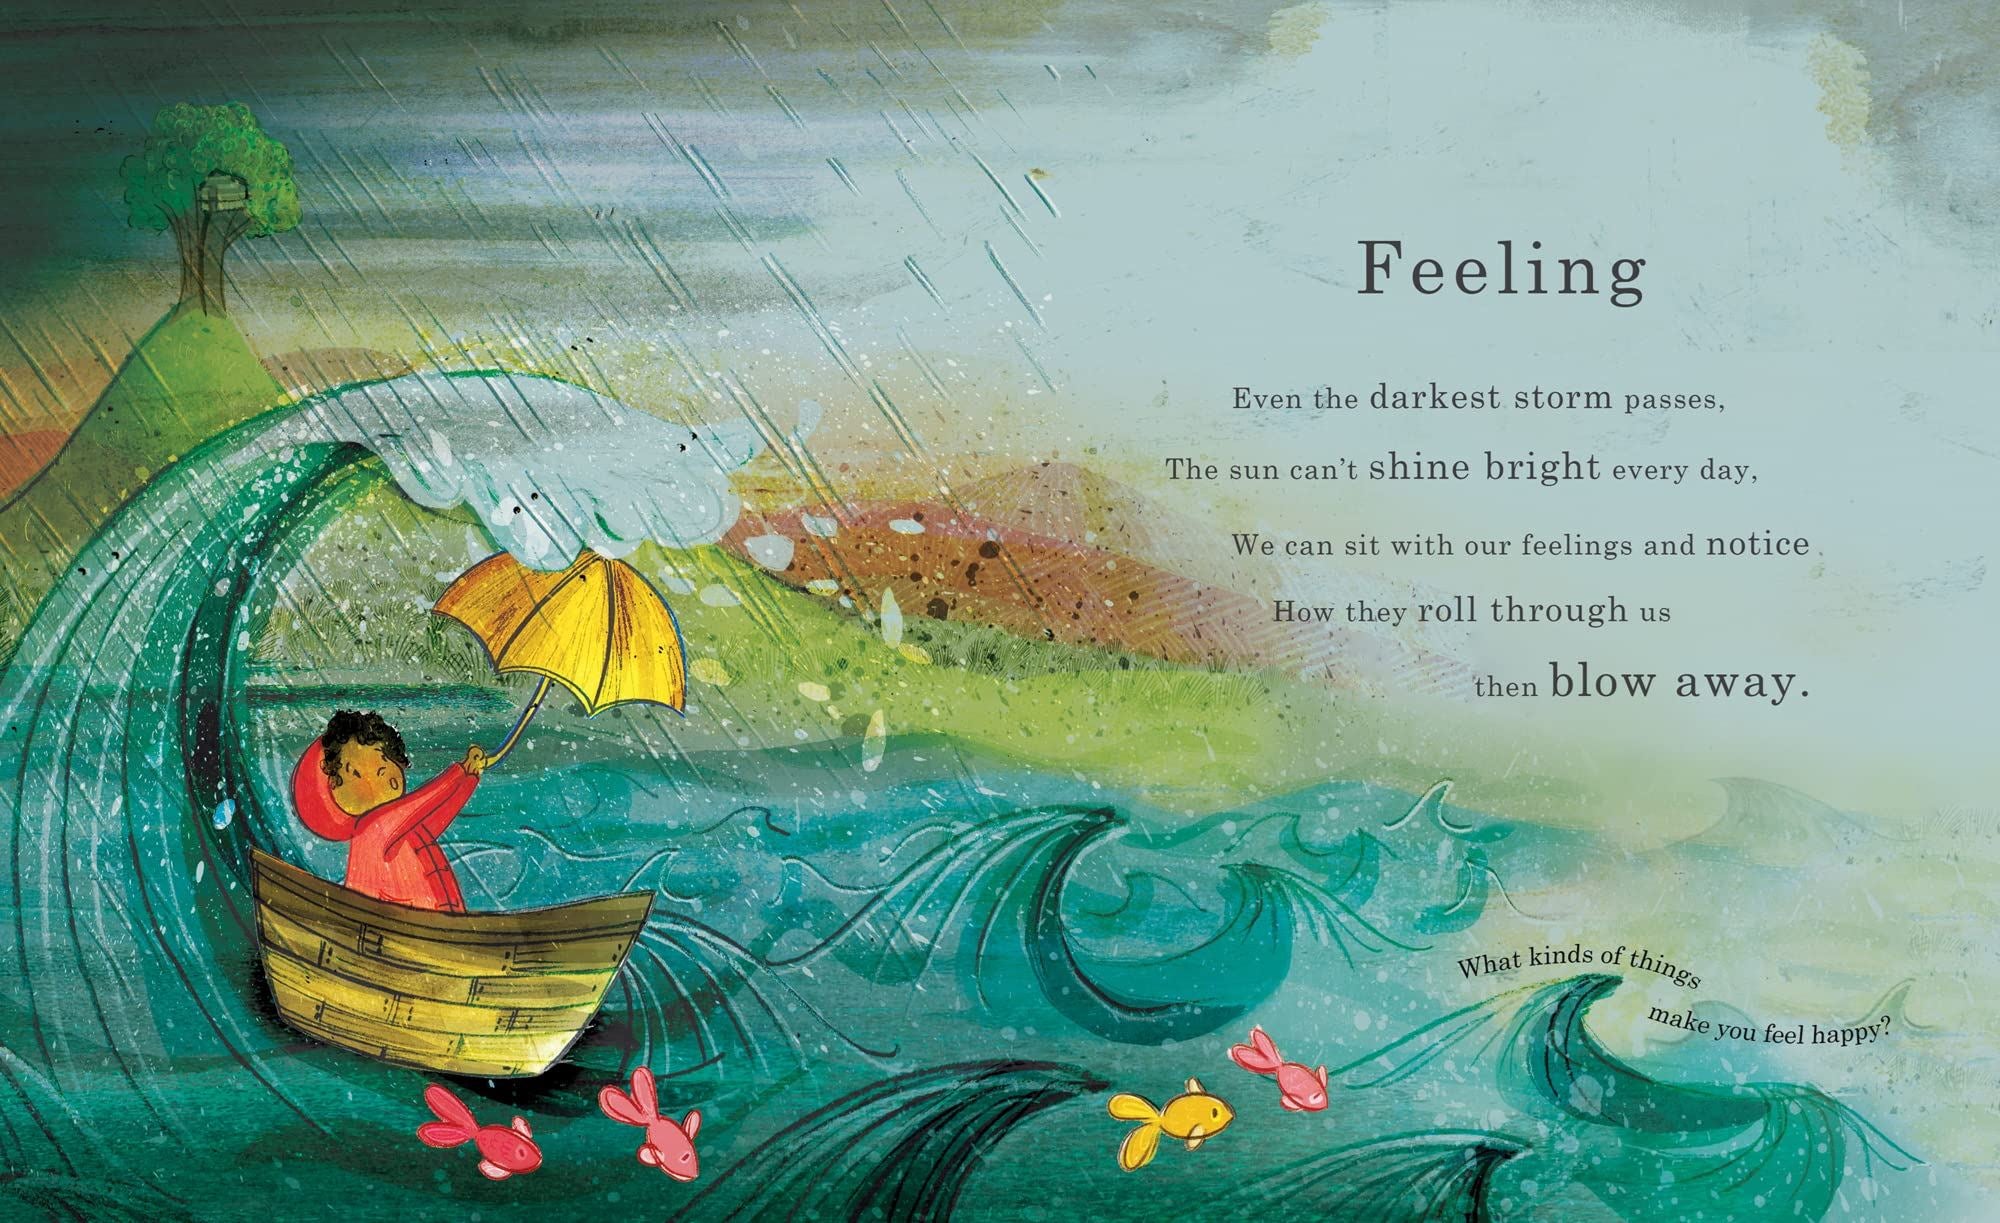 Happy: A Children's Book Of Mindfulness